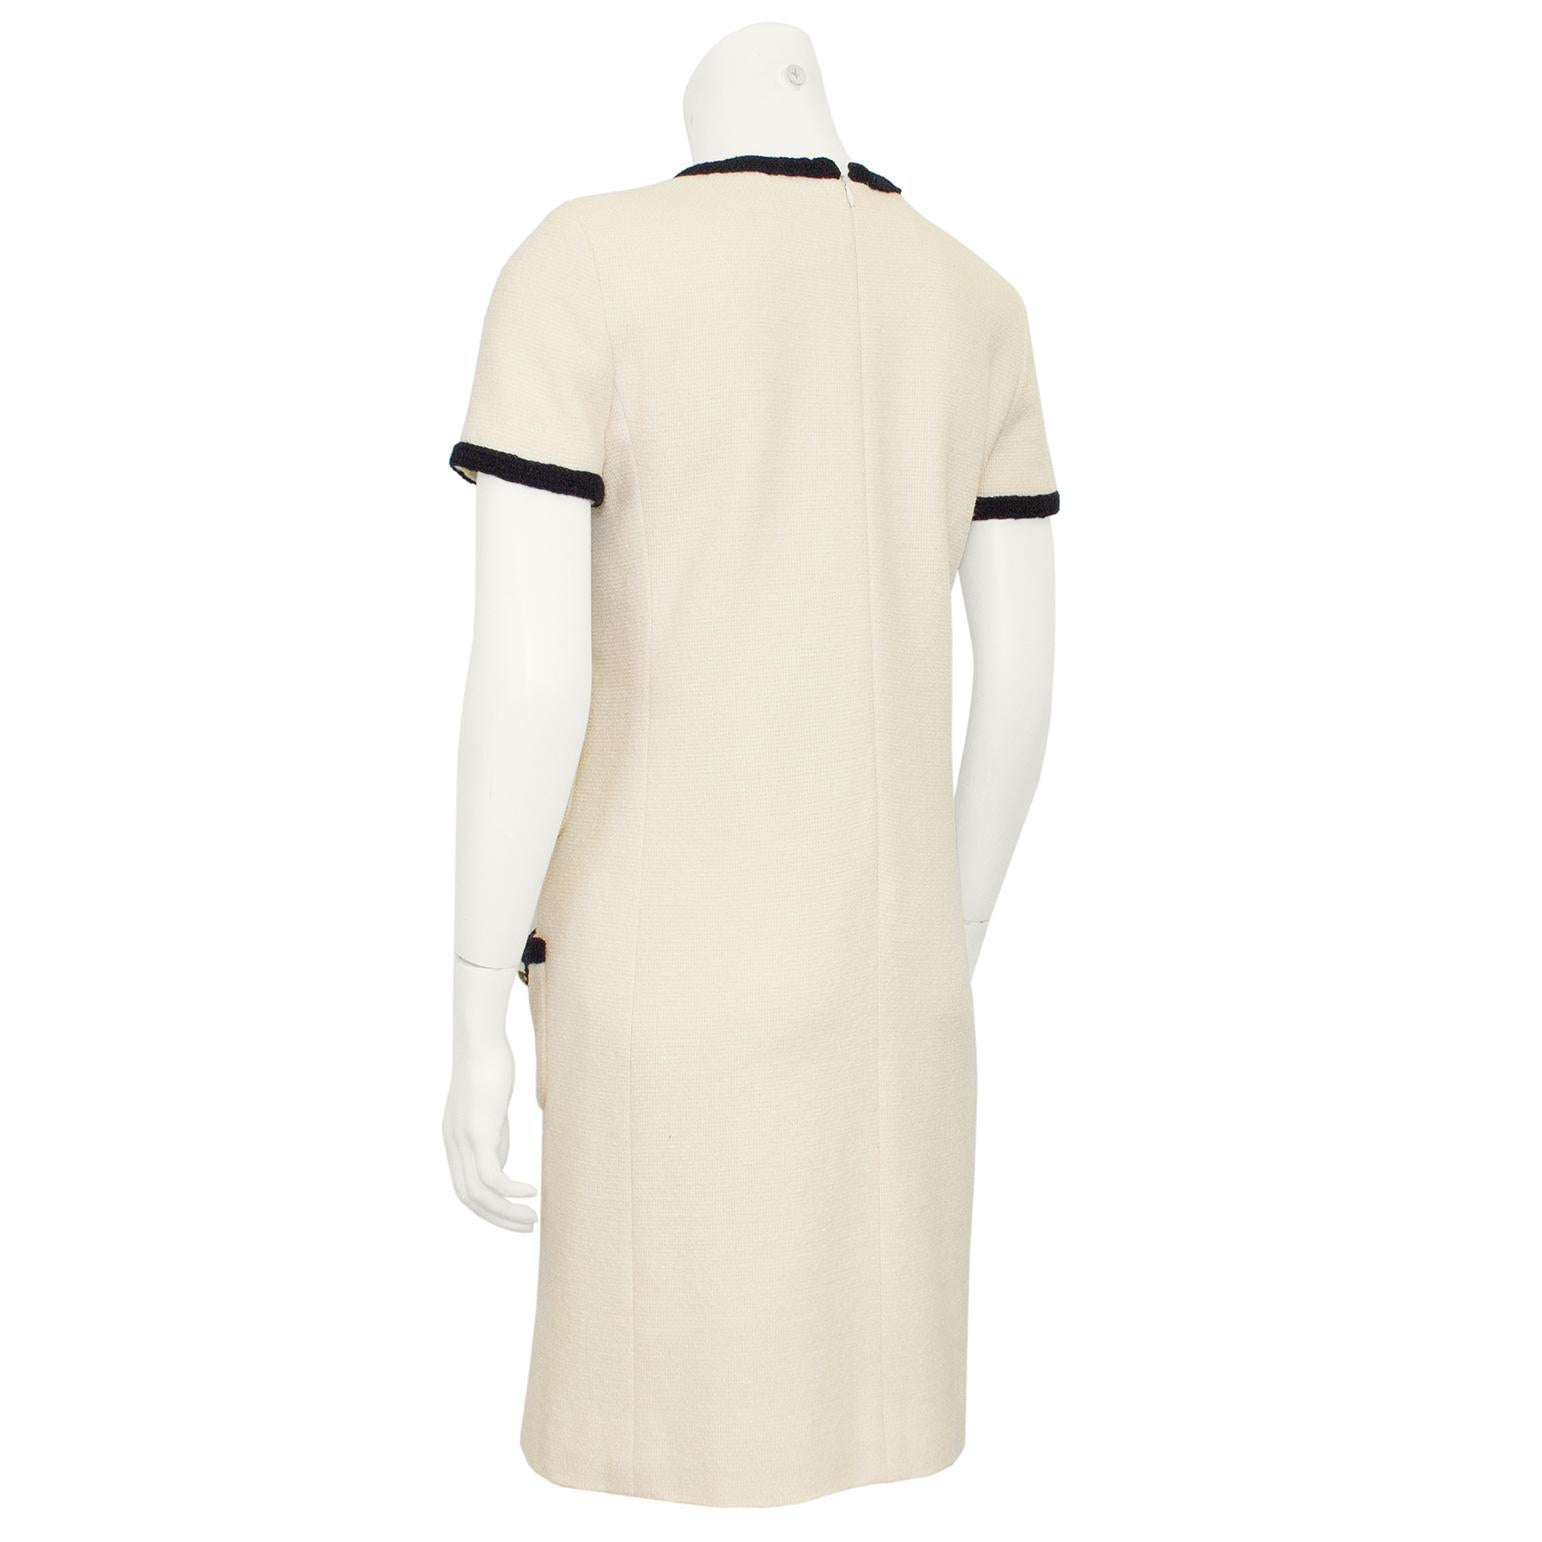 Chanel Autumn/Winter 2005 Cream Wool Dress with Black Passimenterie Trim In Good Condition For Sale In Toronto, Ontario